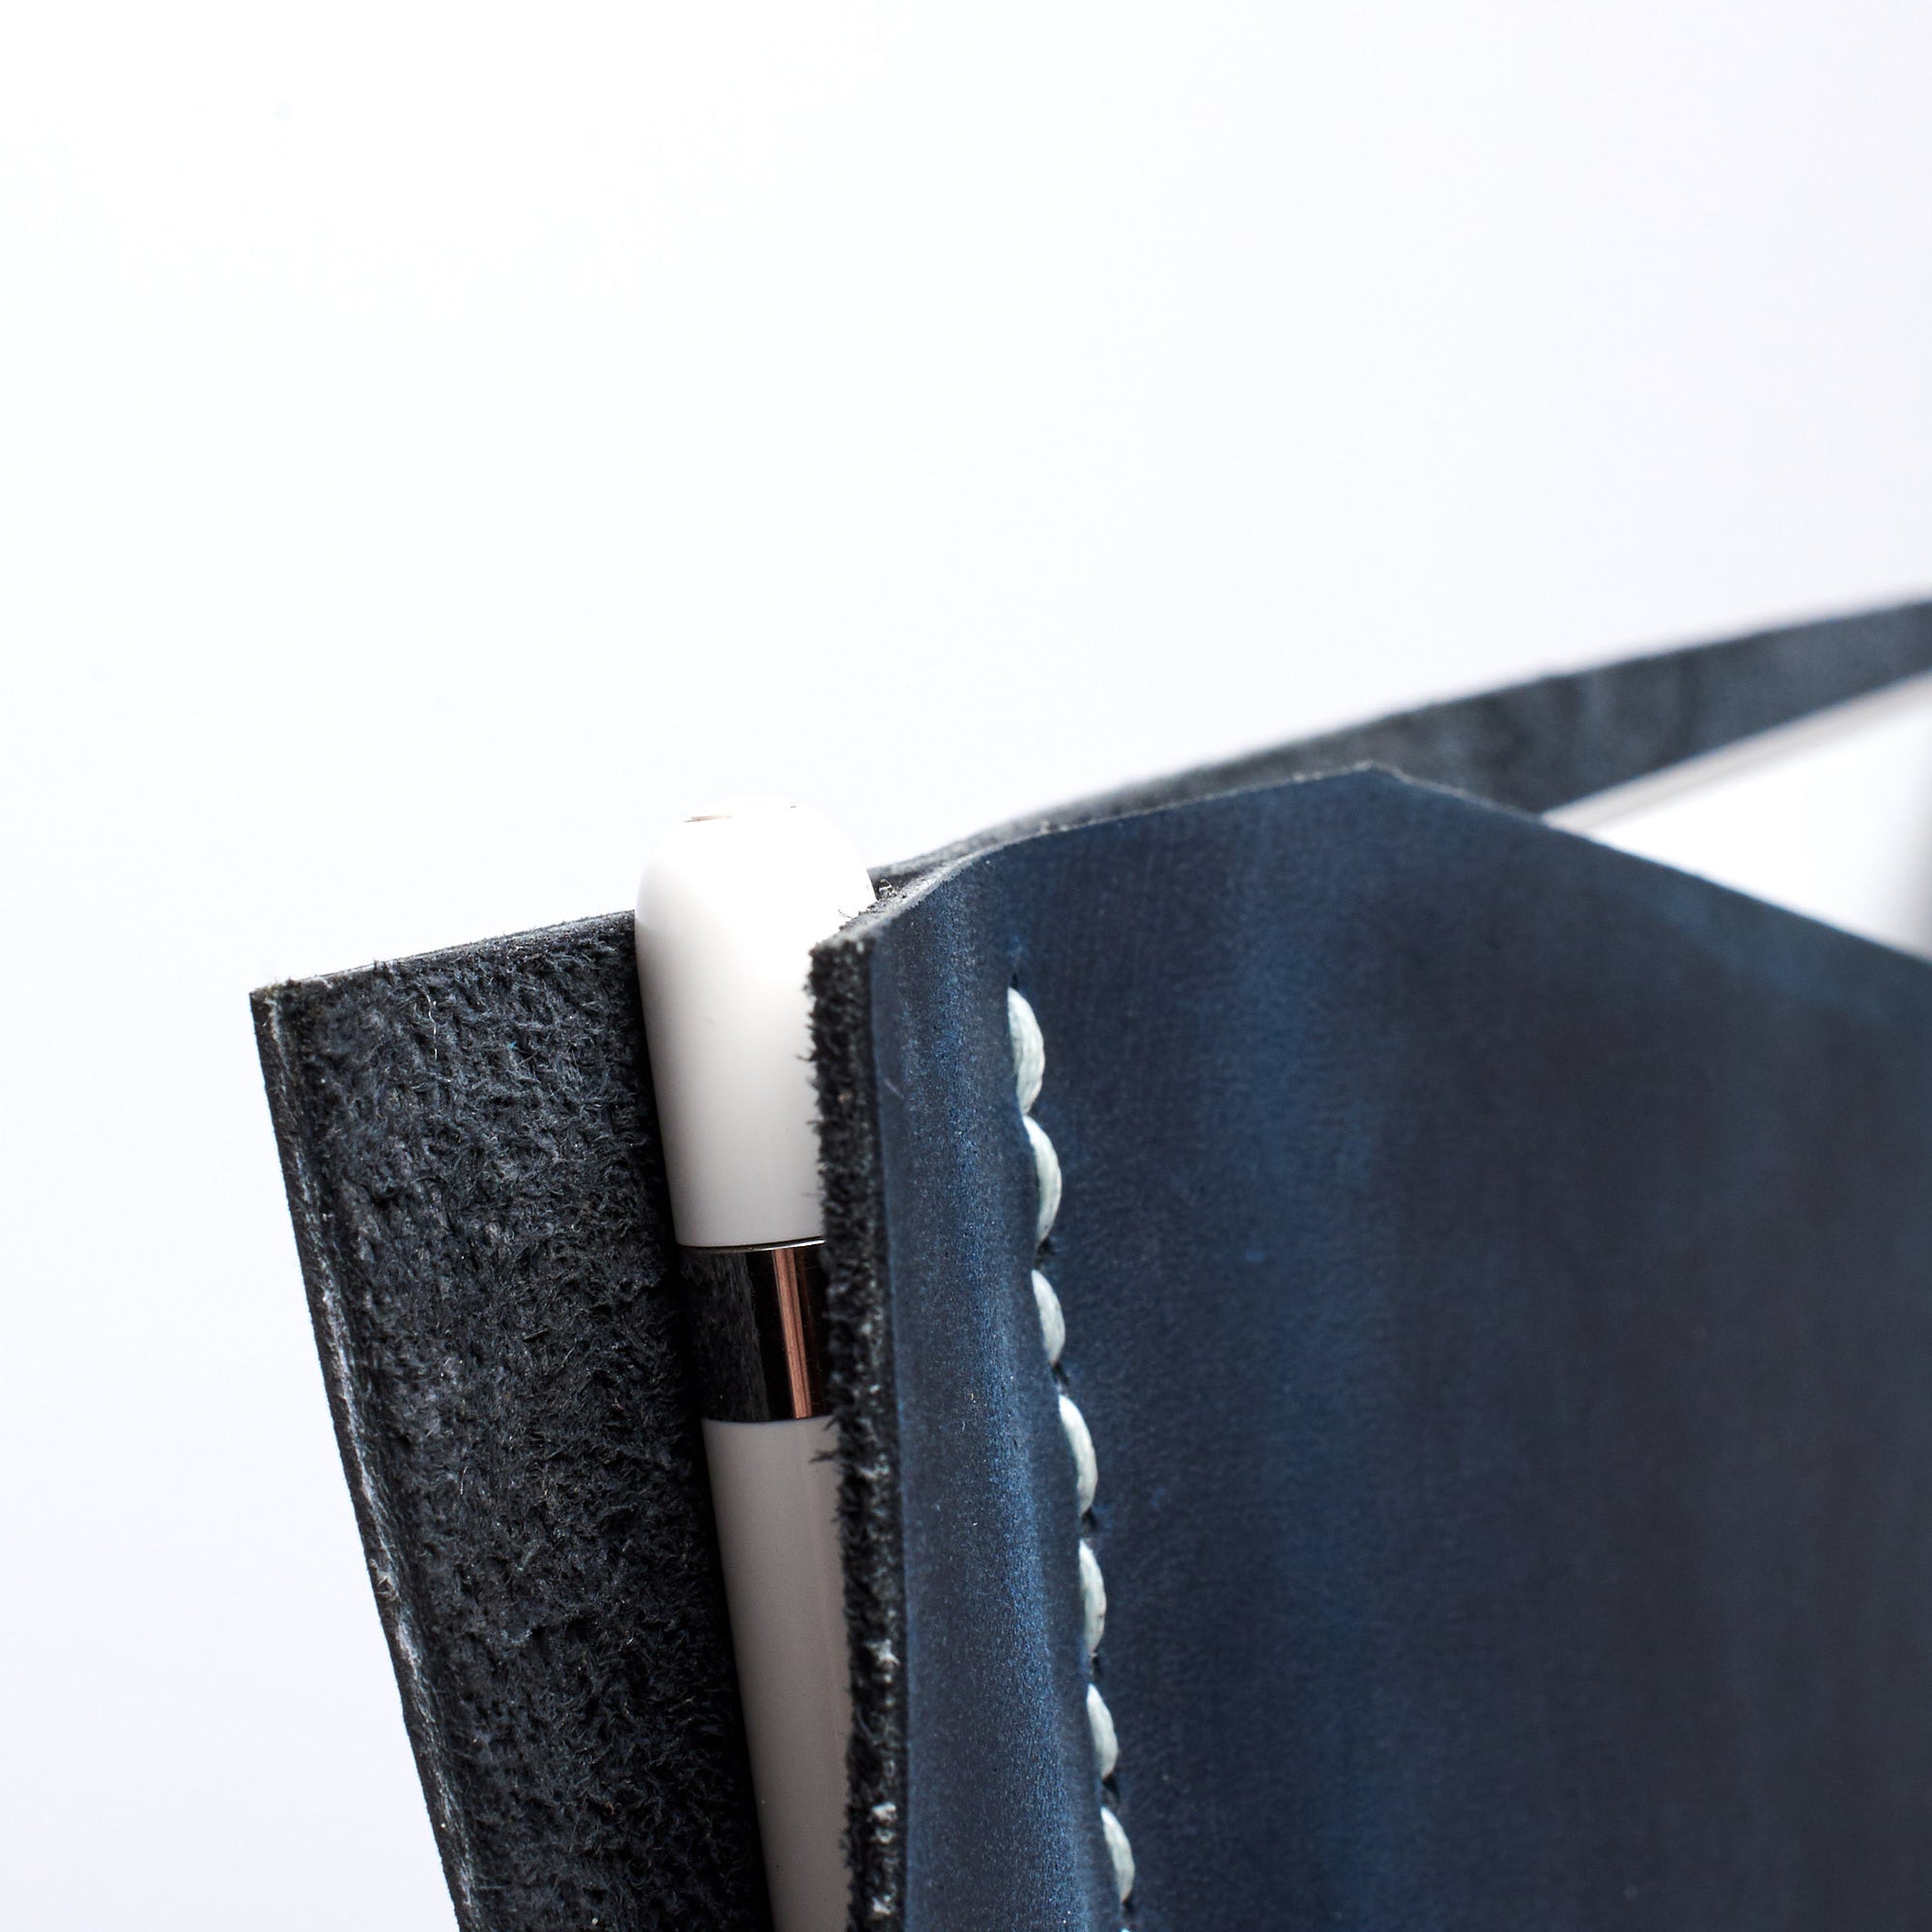 Apple pencil detail. Blue iPad pro leather case with pen holder. Soft leather interior